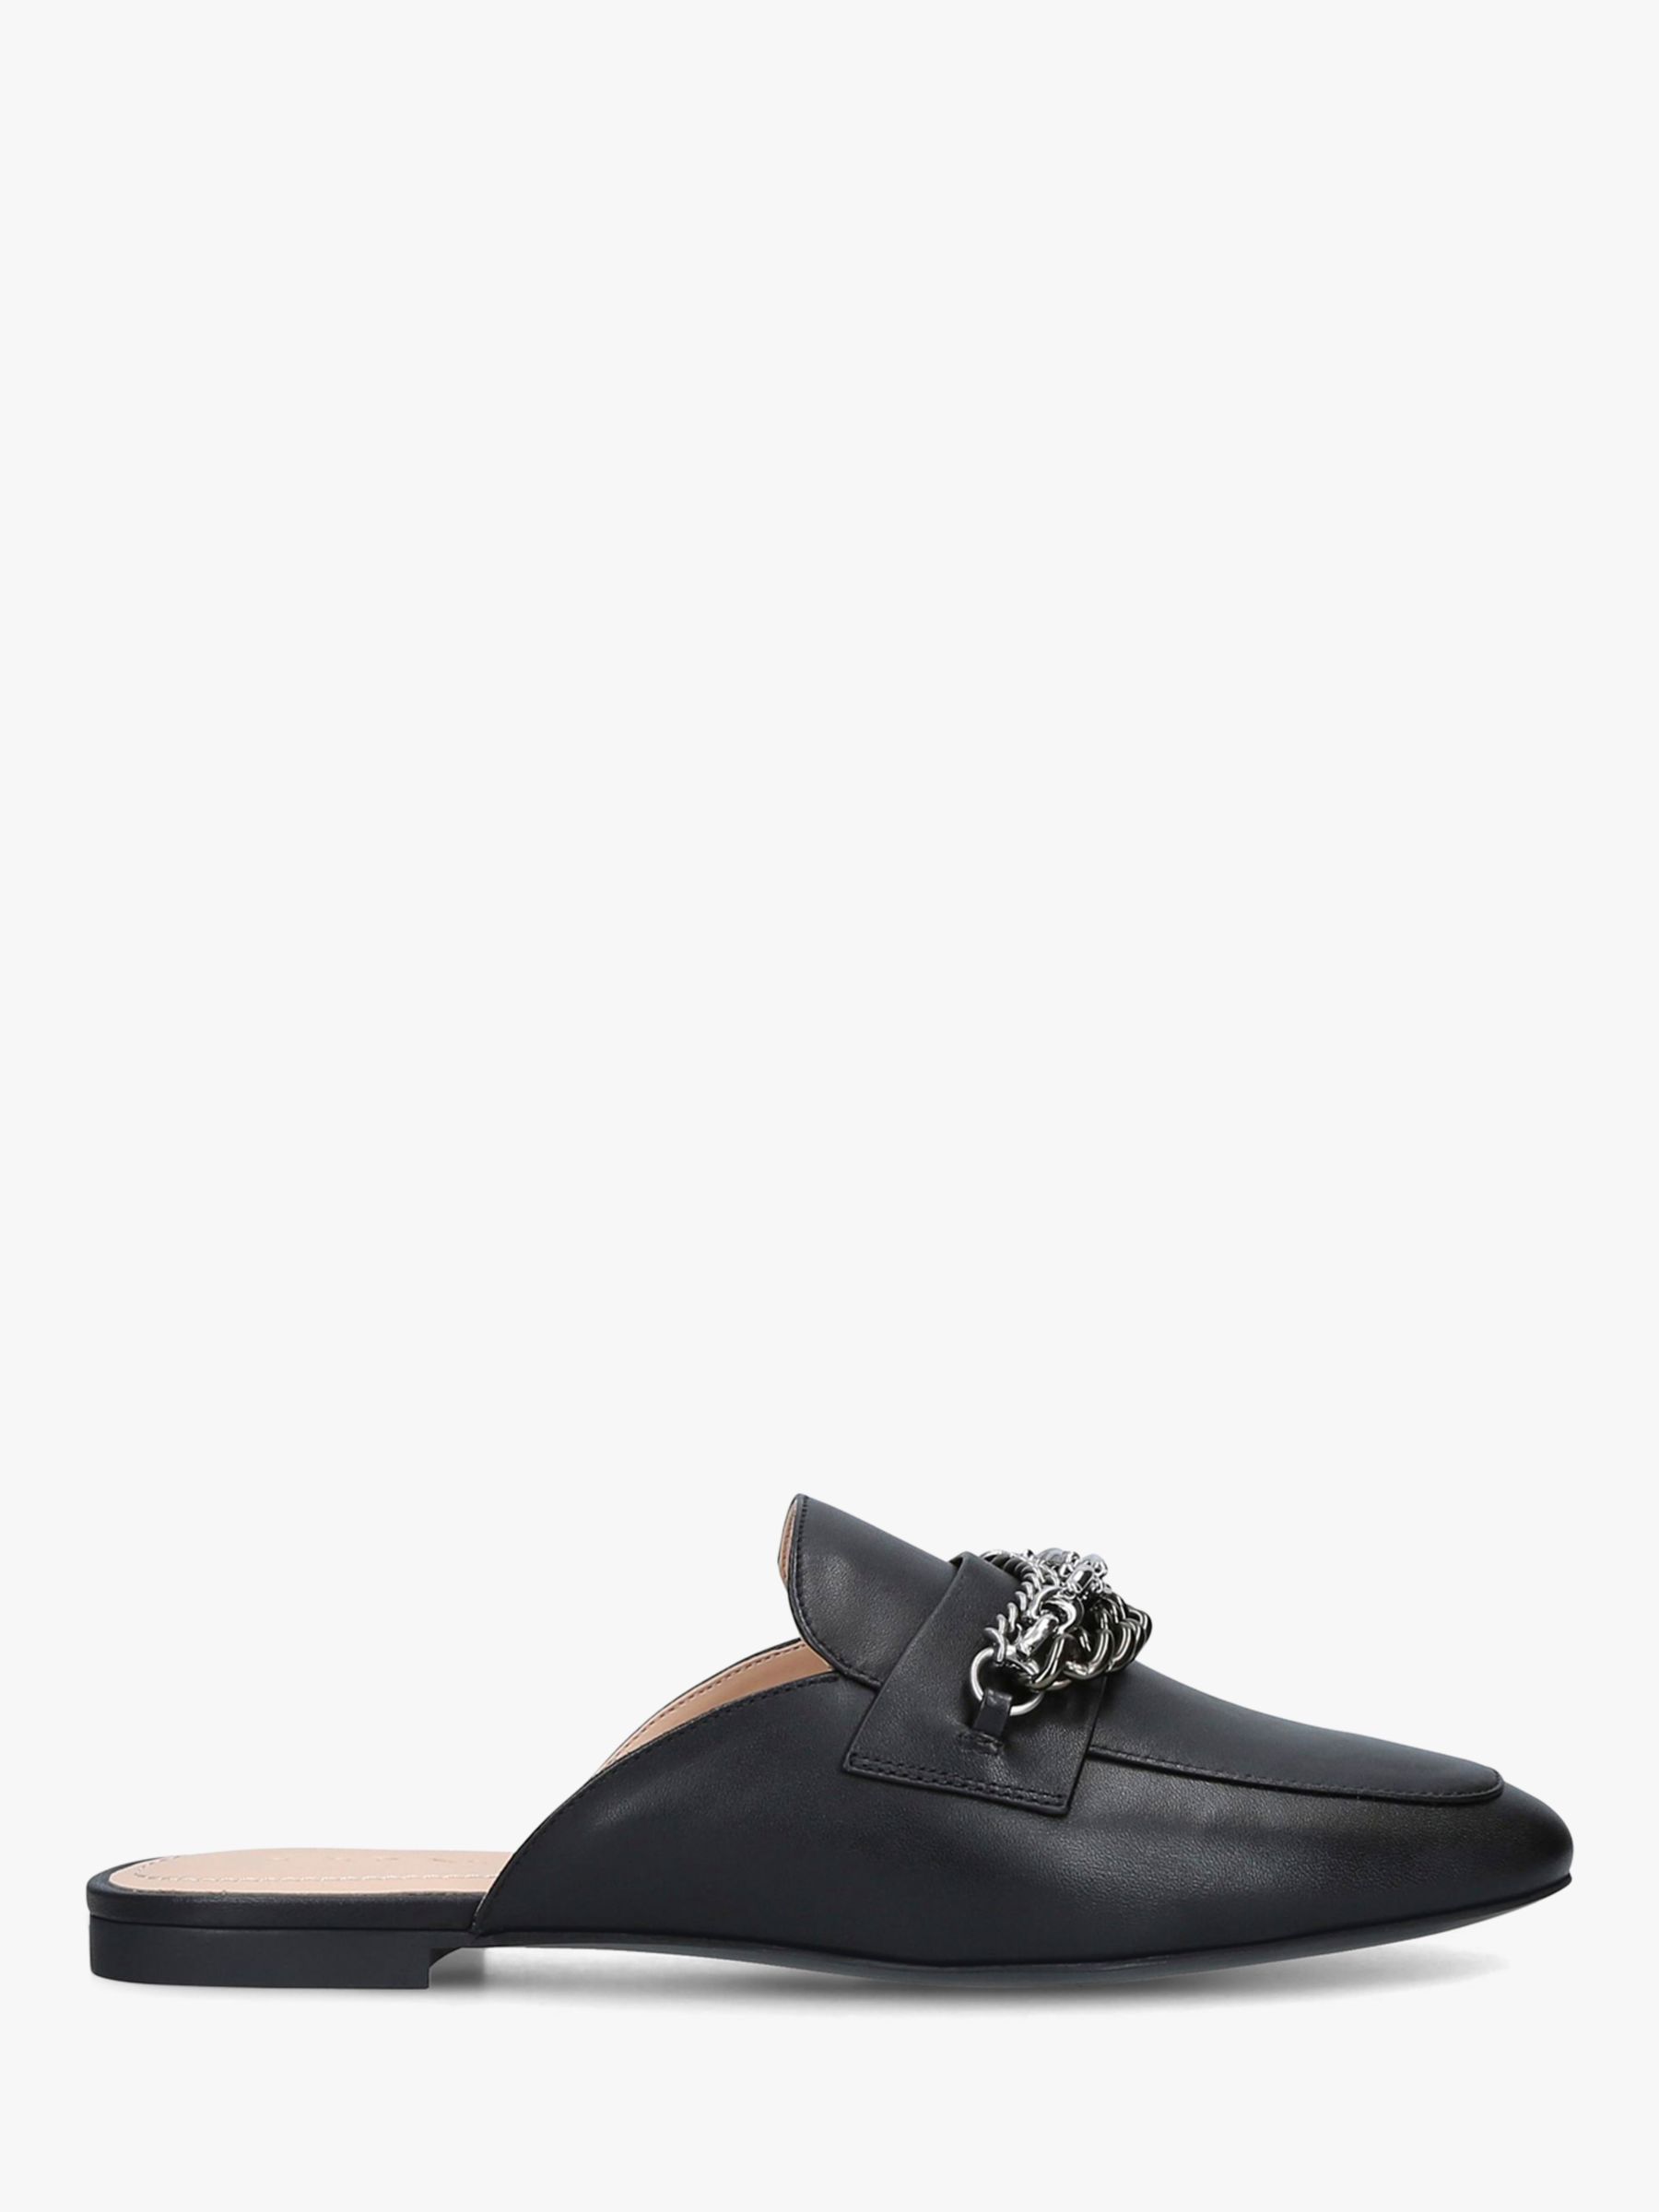 Coach Faye Leather Chain Mule Loafers | Black at John Lewis & Partners